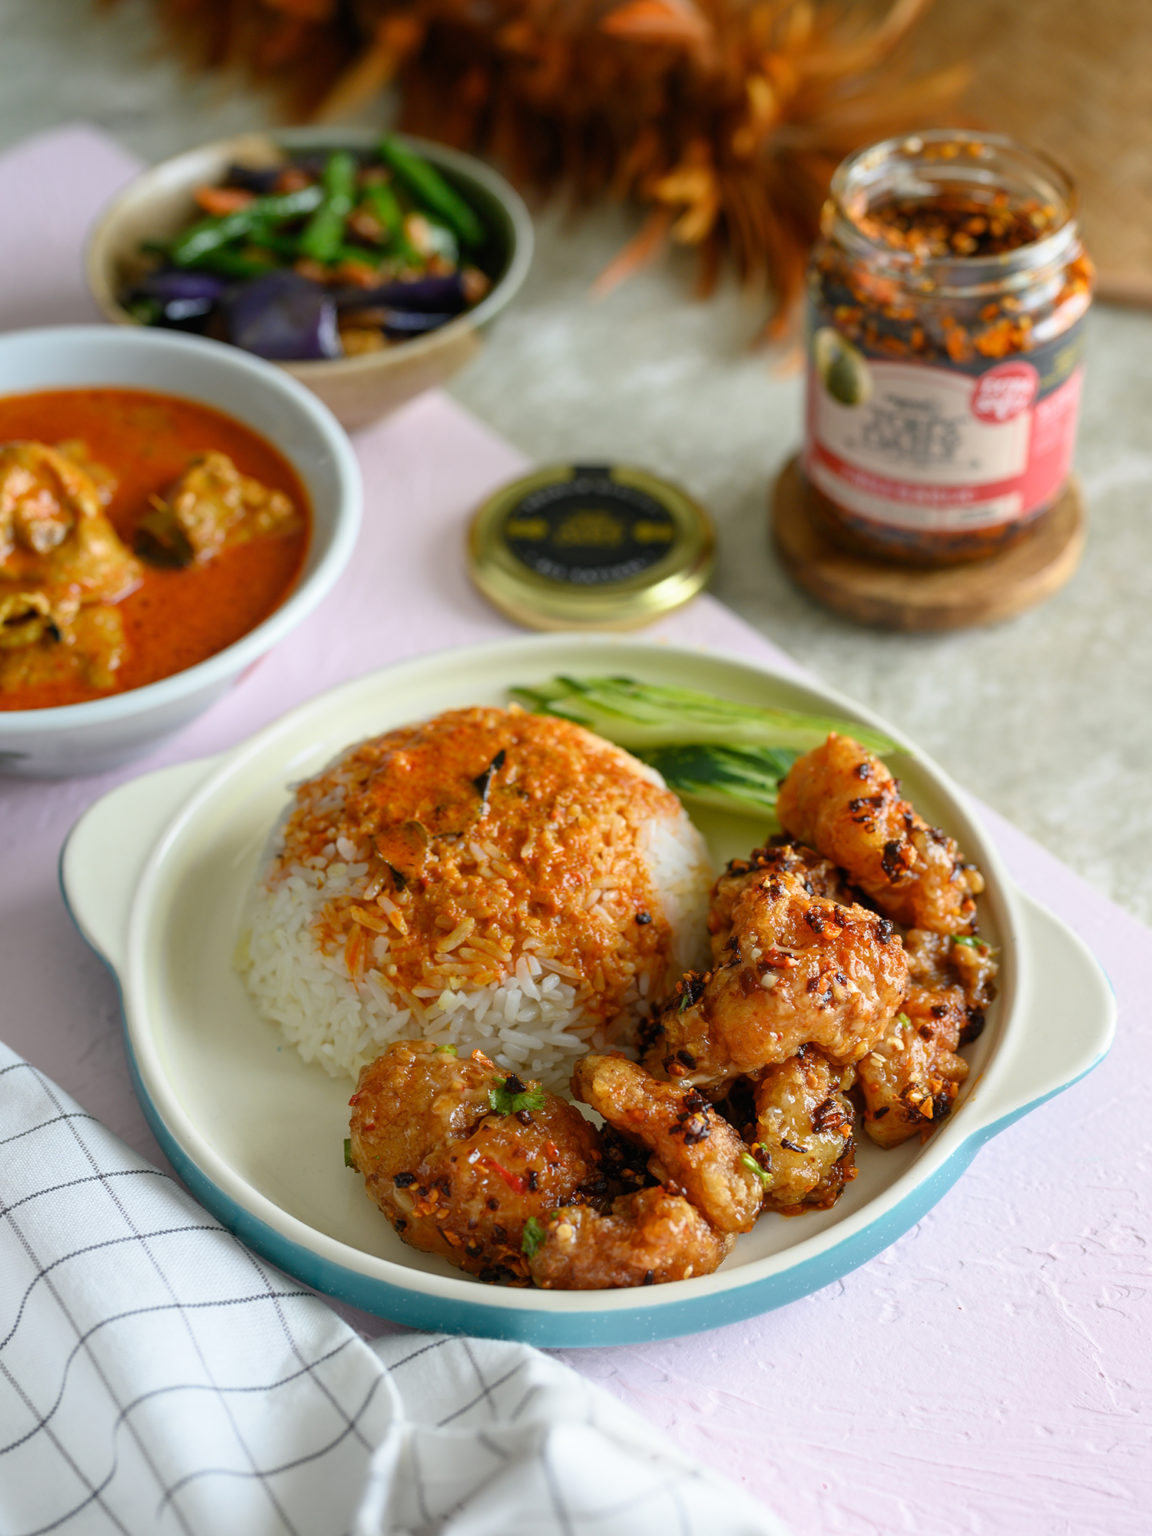 Spicy Fish Fillet - Toh's Daily